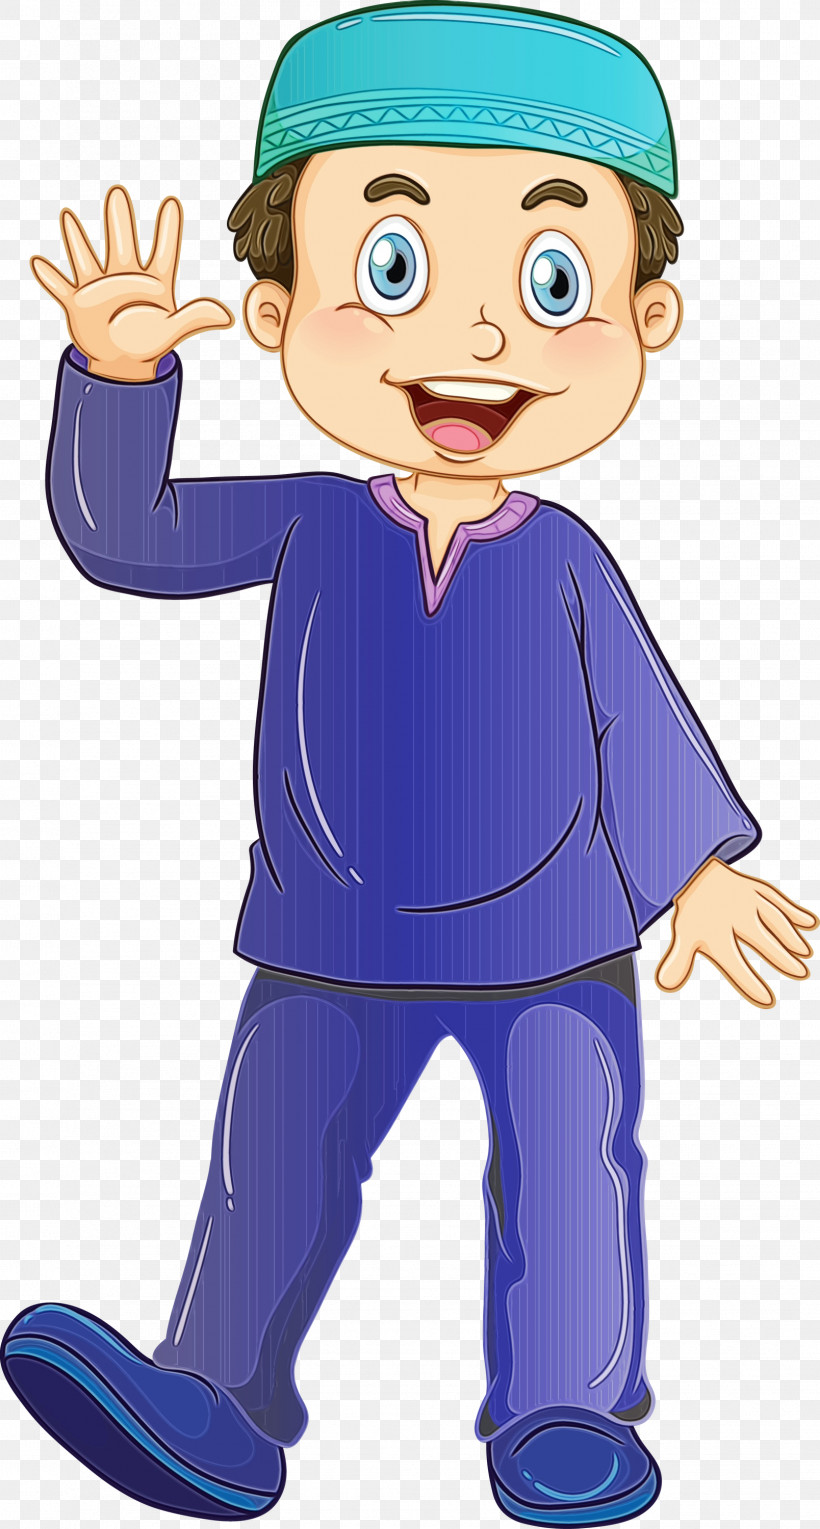 Cartoon Finger Gesture Thumb Child, PNG, 1608x3000px, Muslim People, Cartoon, Child, Finger, Gesture Download Free